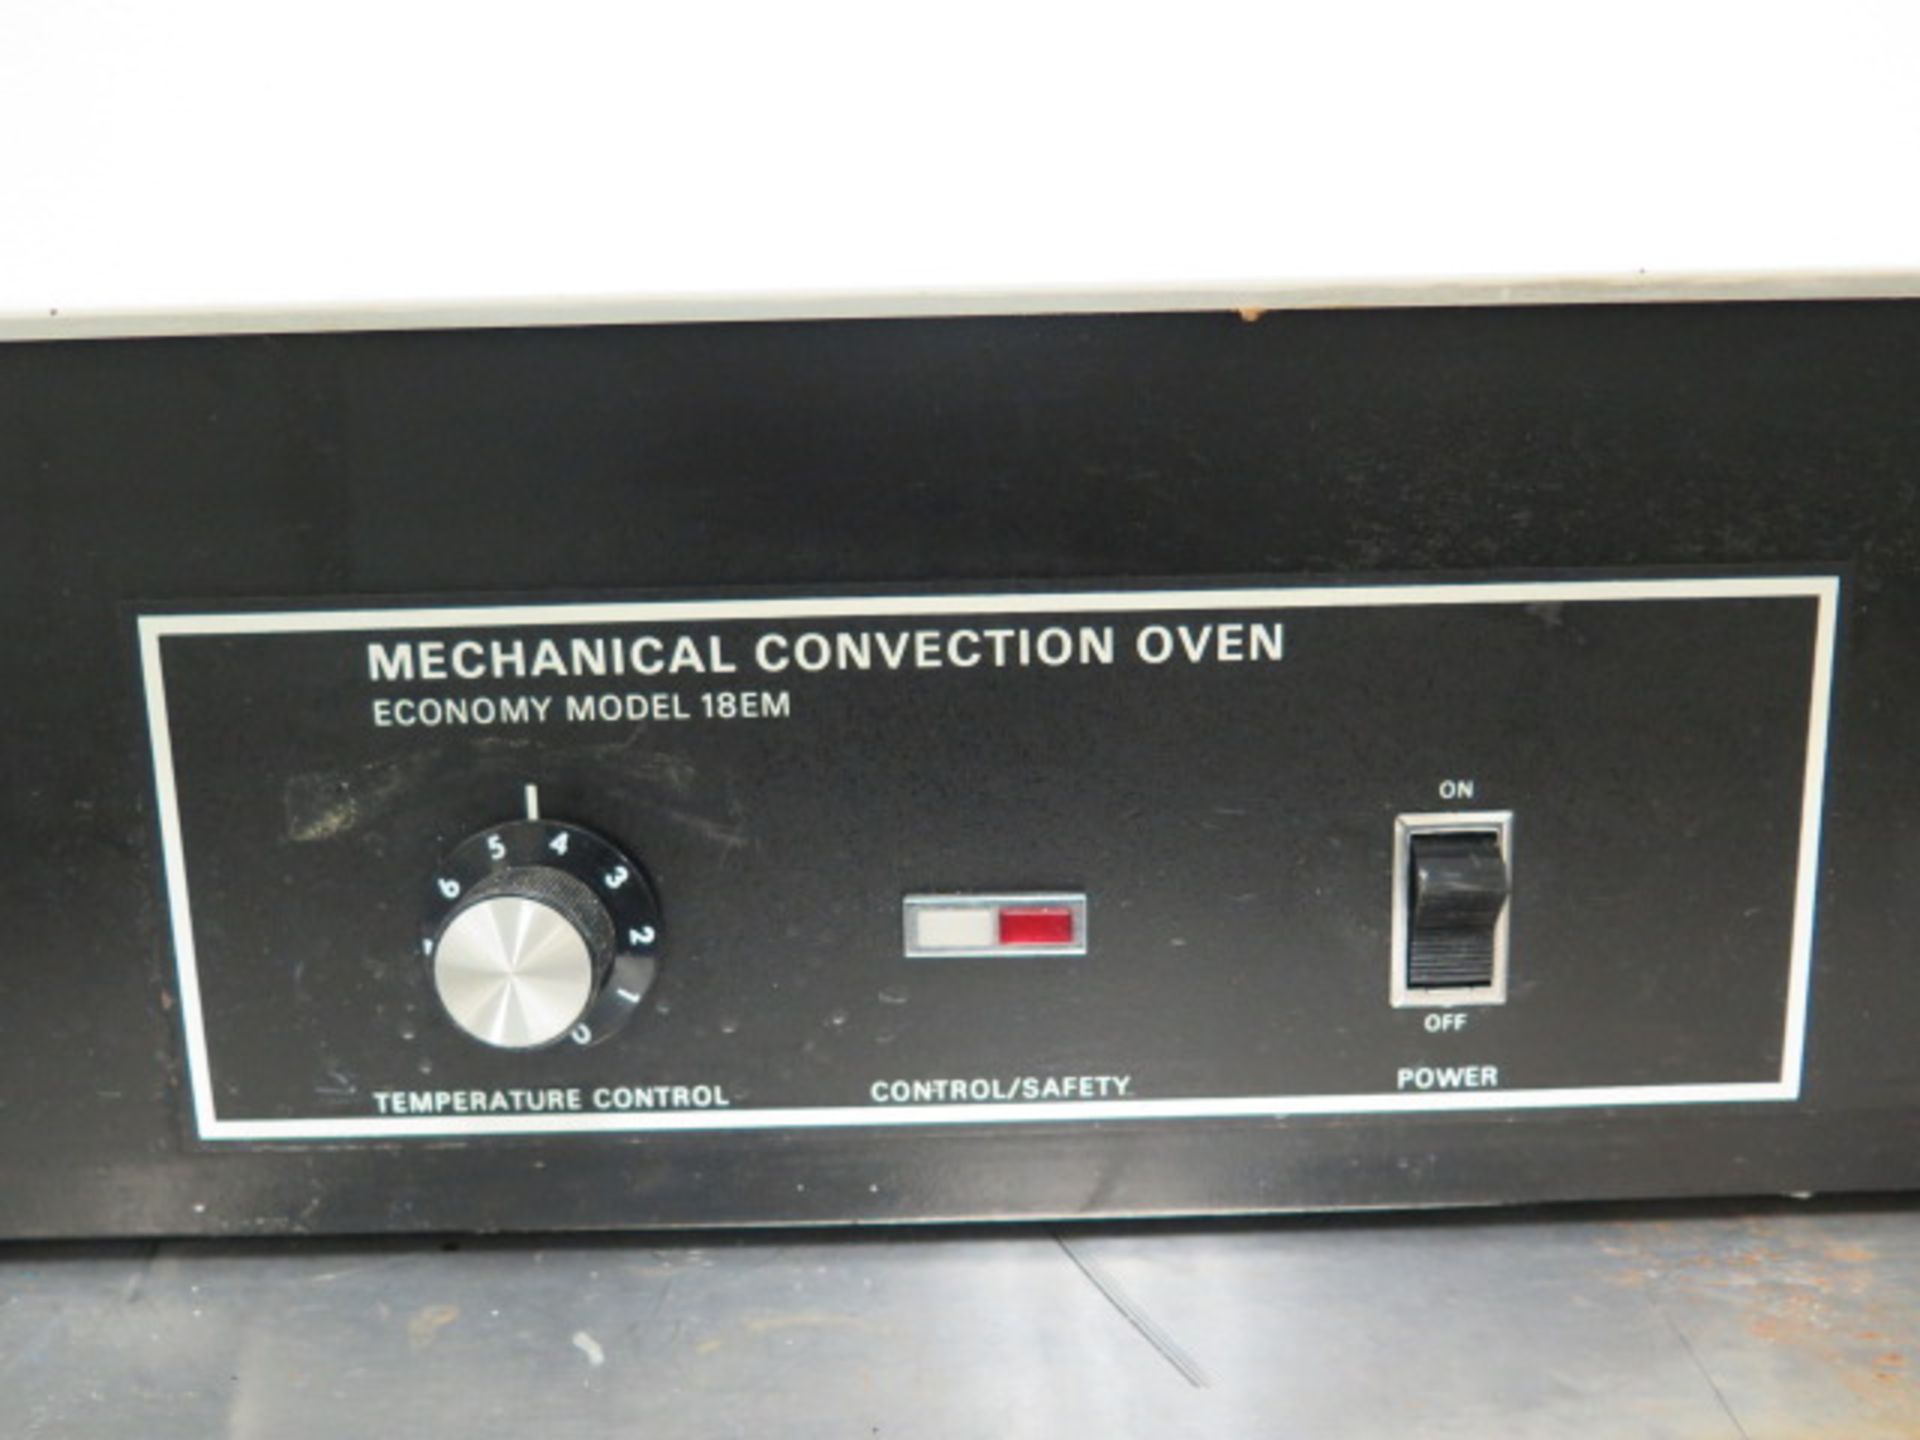 Precision Economy mdl. 18EM Mechanical Convection Oven s/n 10AY-3 Heats to 240 Degrees C (SOLD AS-IS - Image 5 of 6